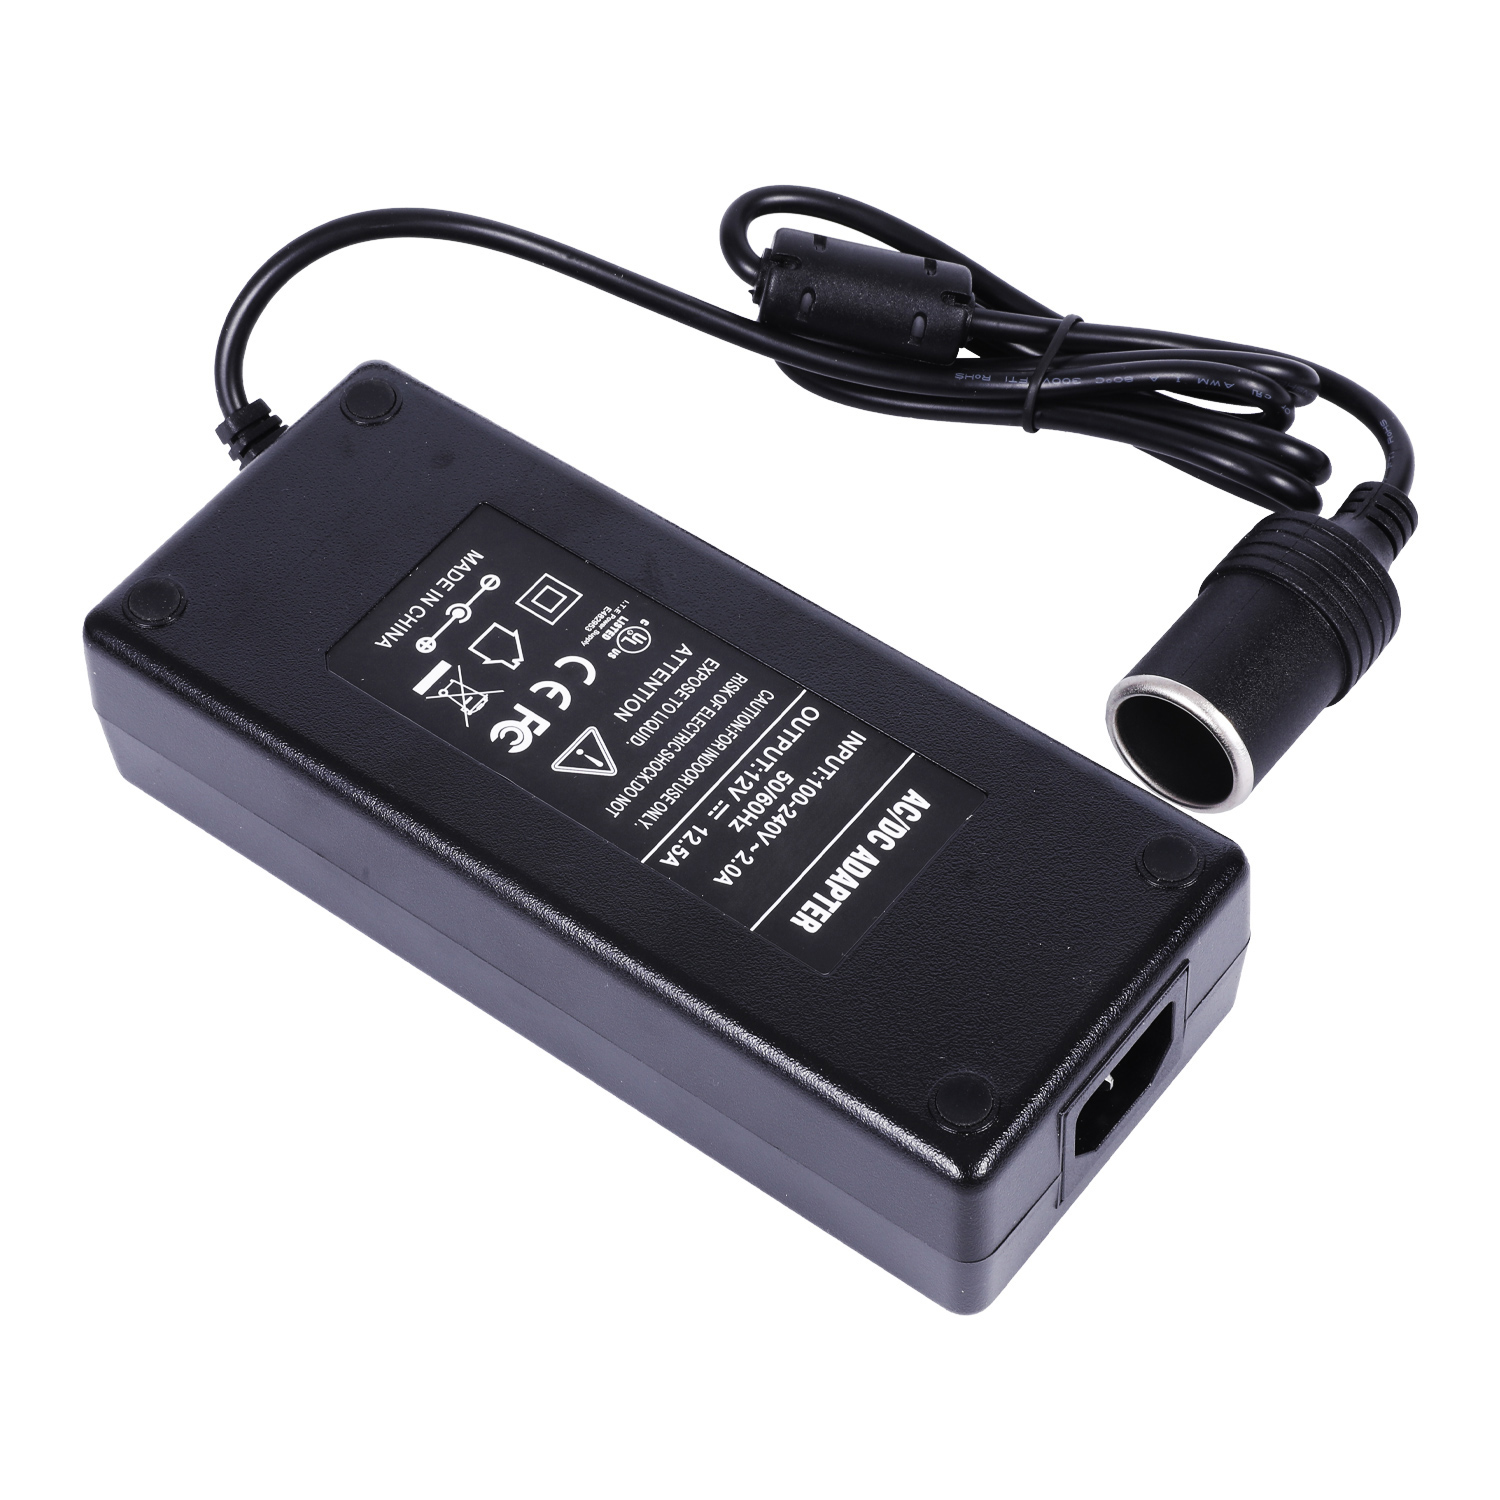 150w adapter ce (1)ag1